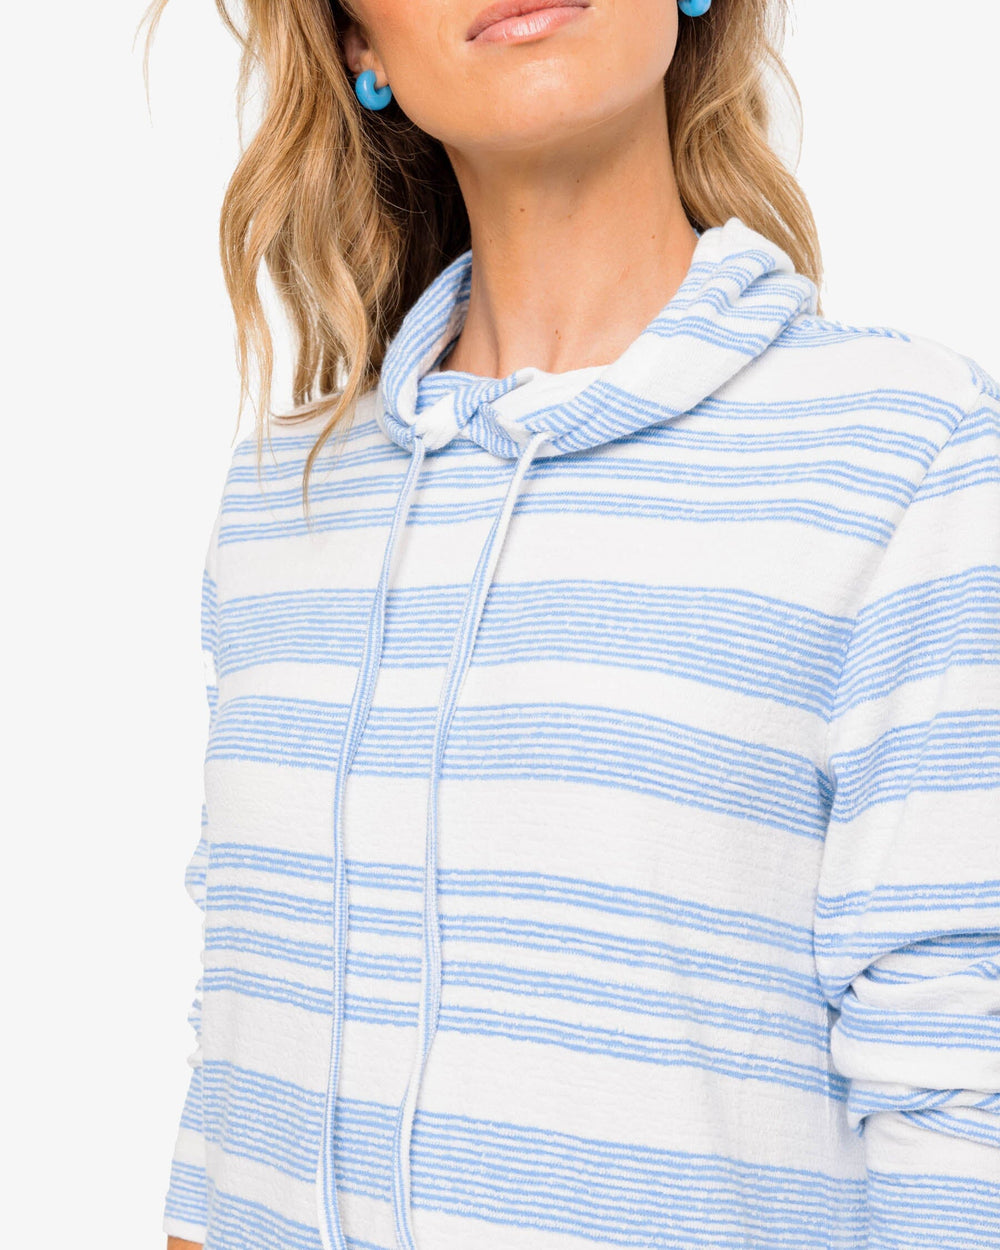 The detail view of the Southern Tide Kayla Striped Beach Tunic by Southern Tide - Boat Blue